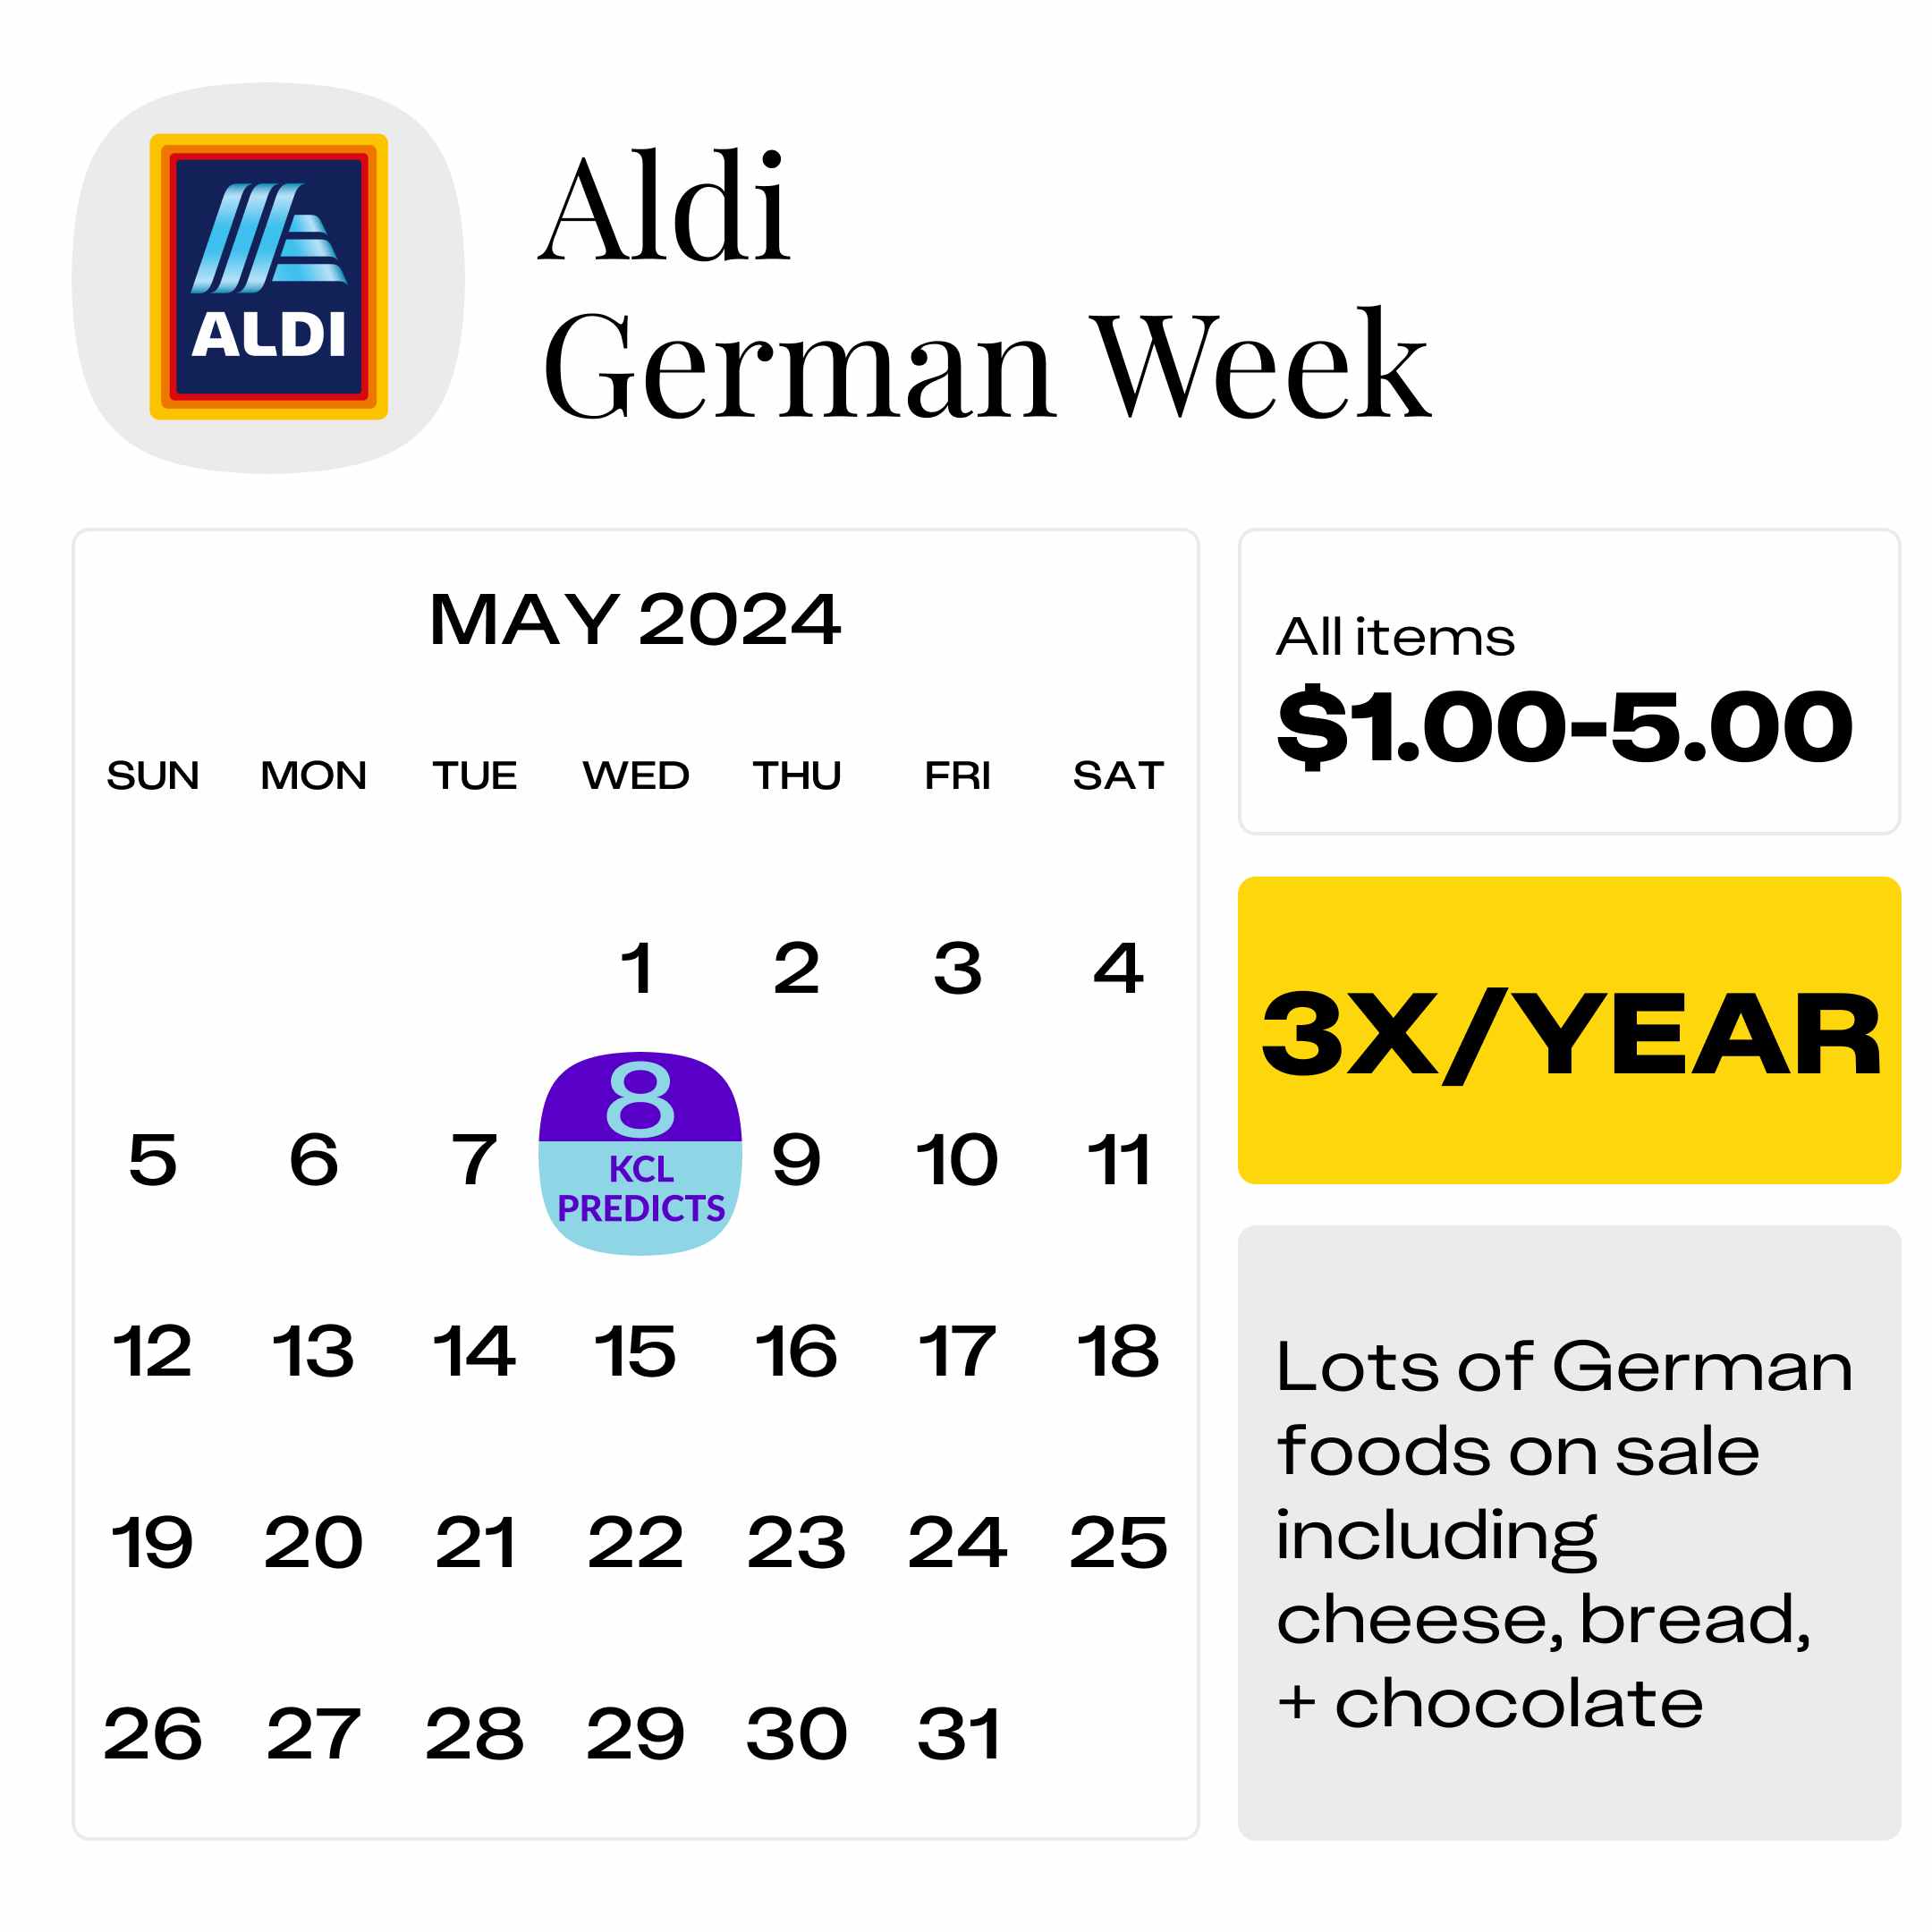 Calendar graphic showing the predicted date for the next Aldi German Week sale on May 8, 2024.